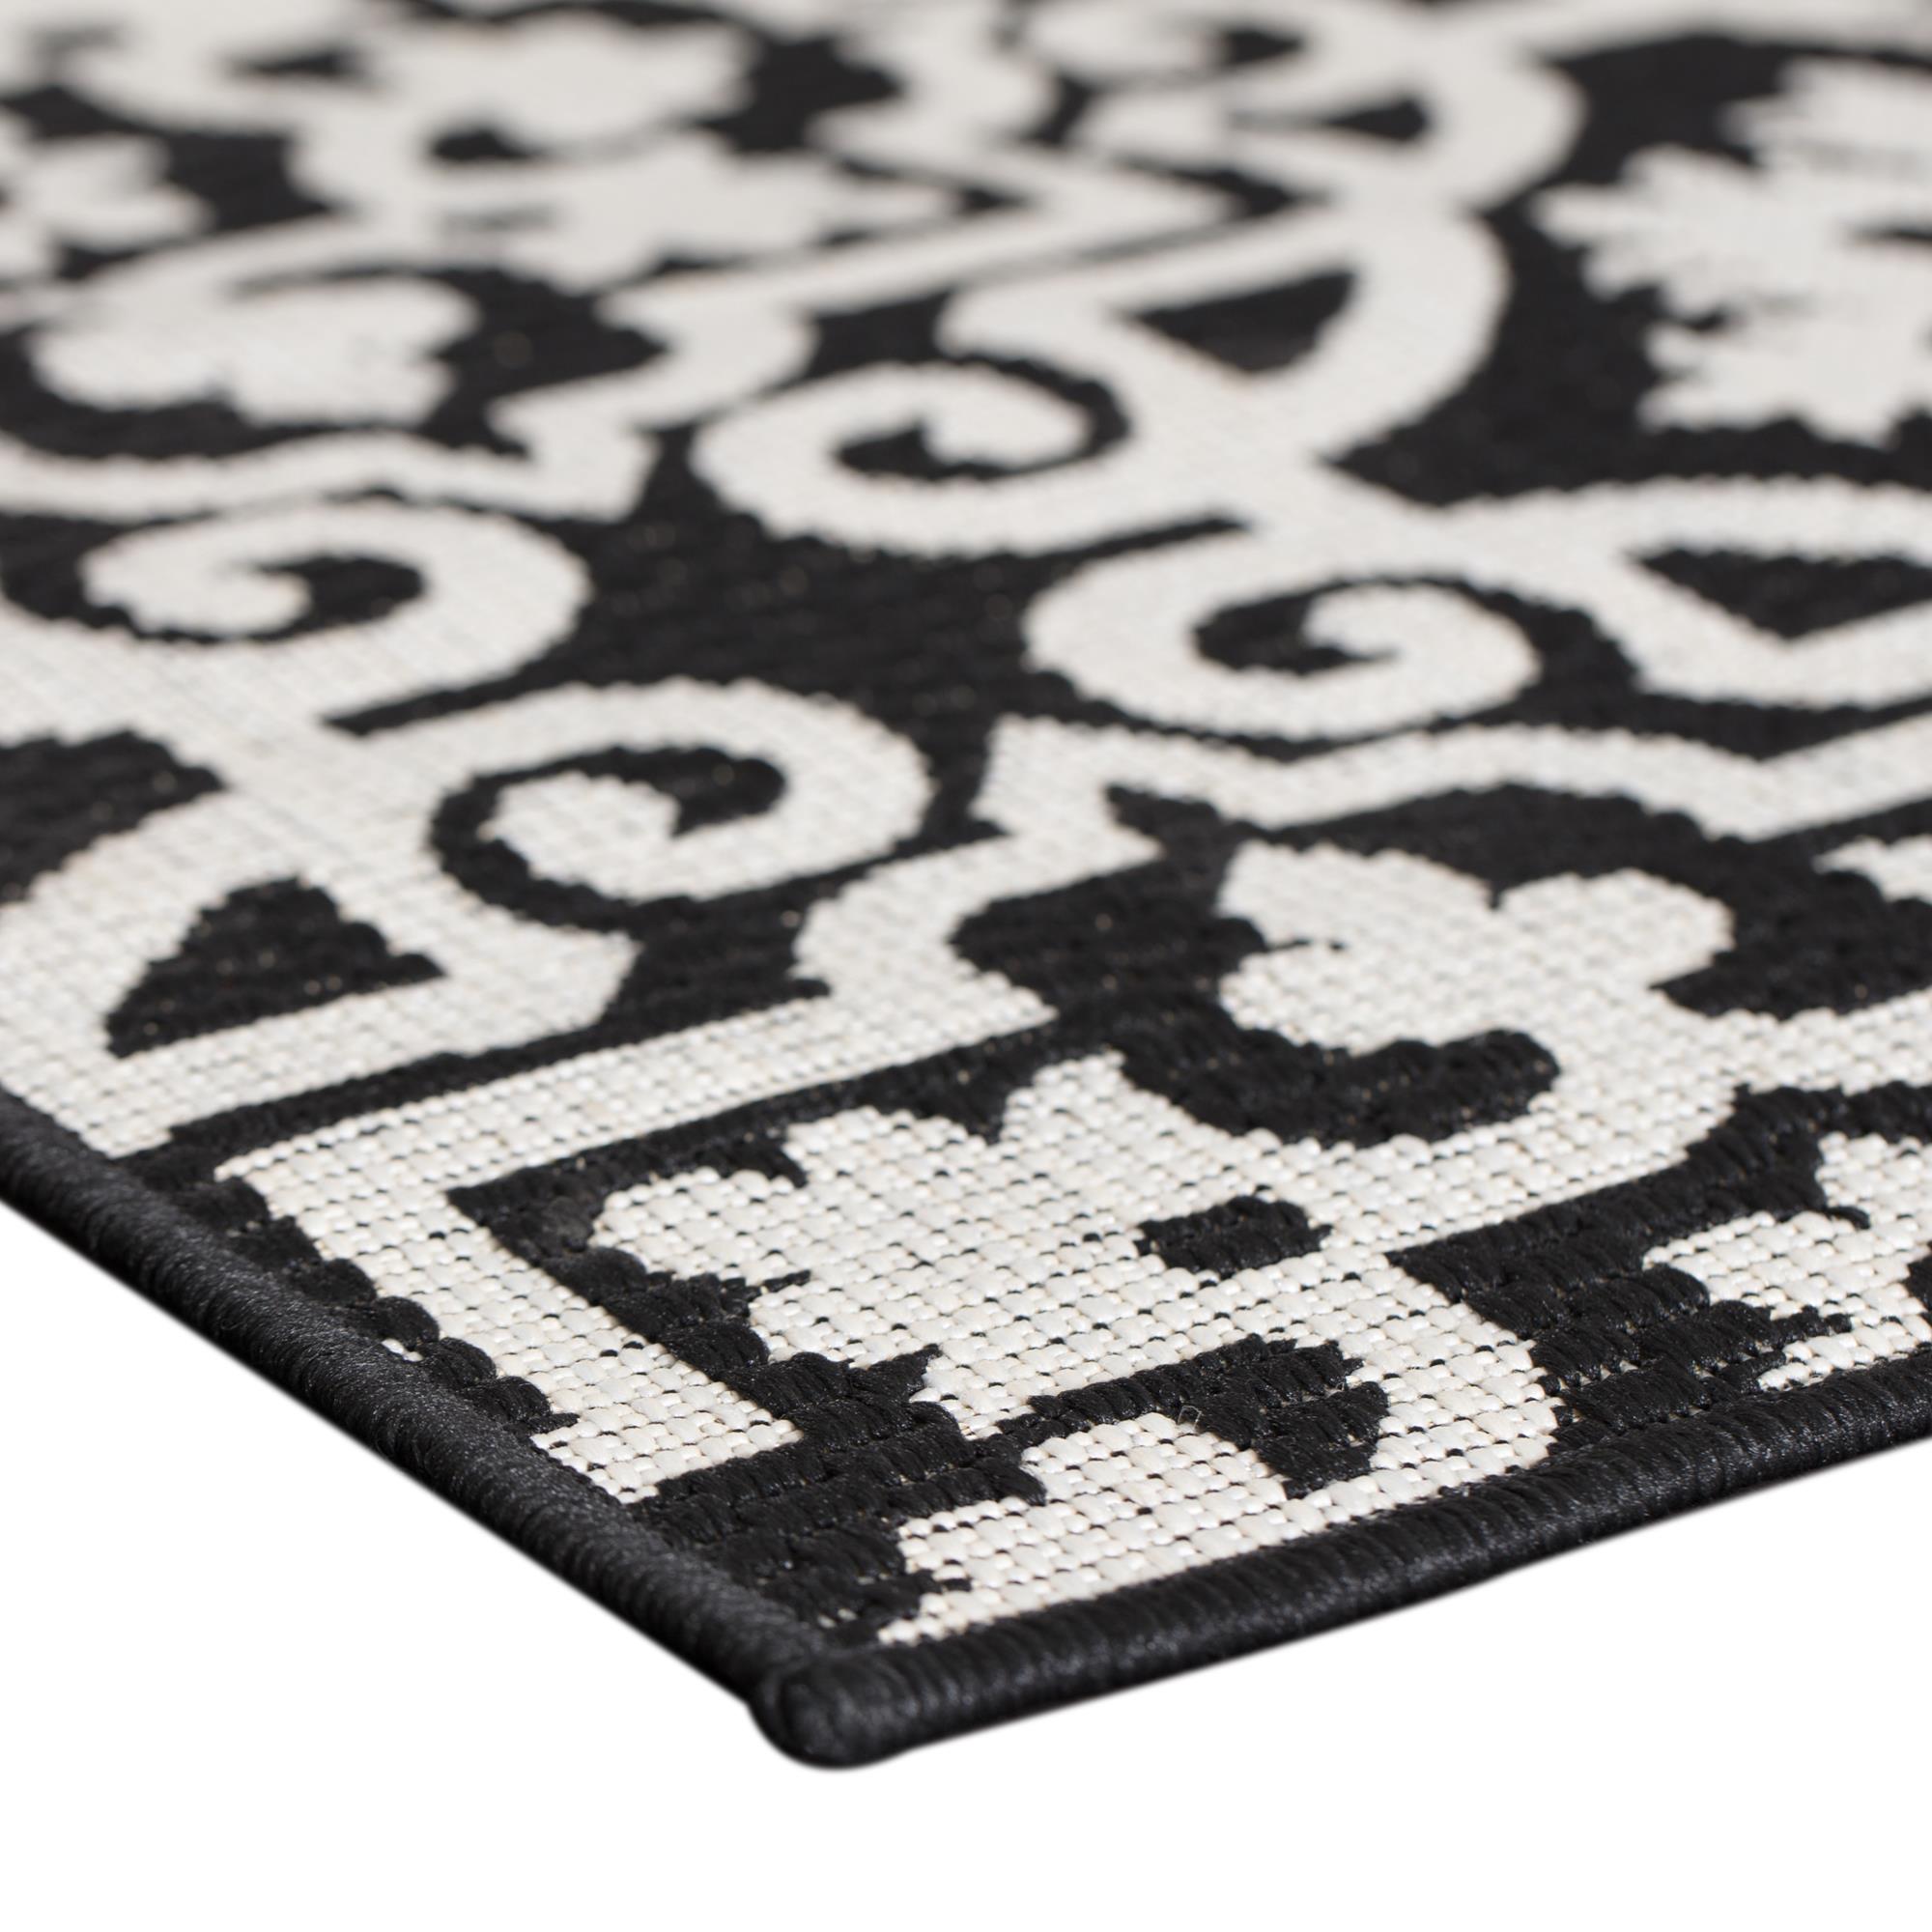 Dolce Bordered Doormats